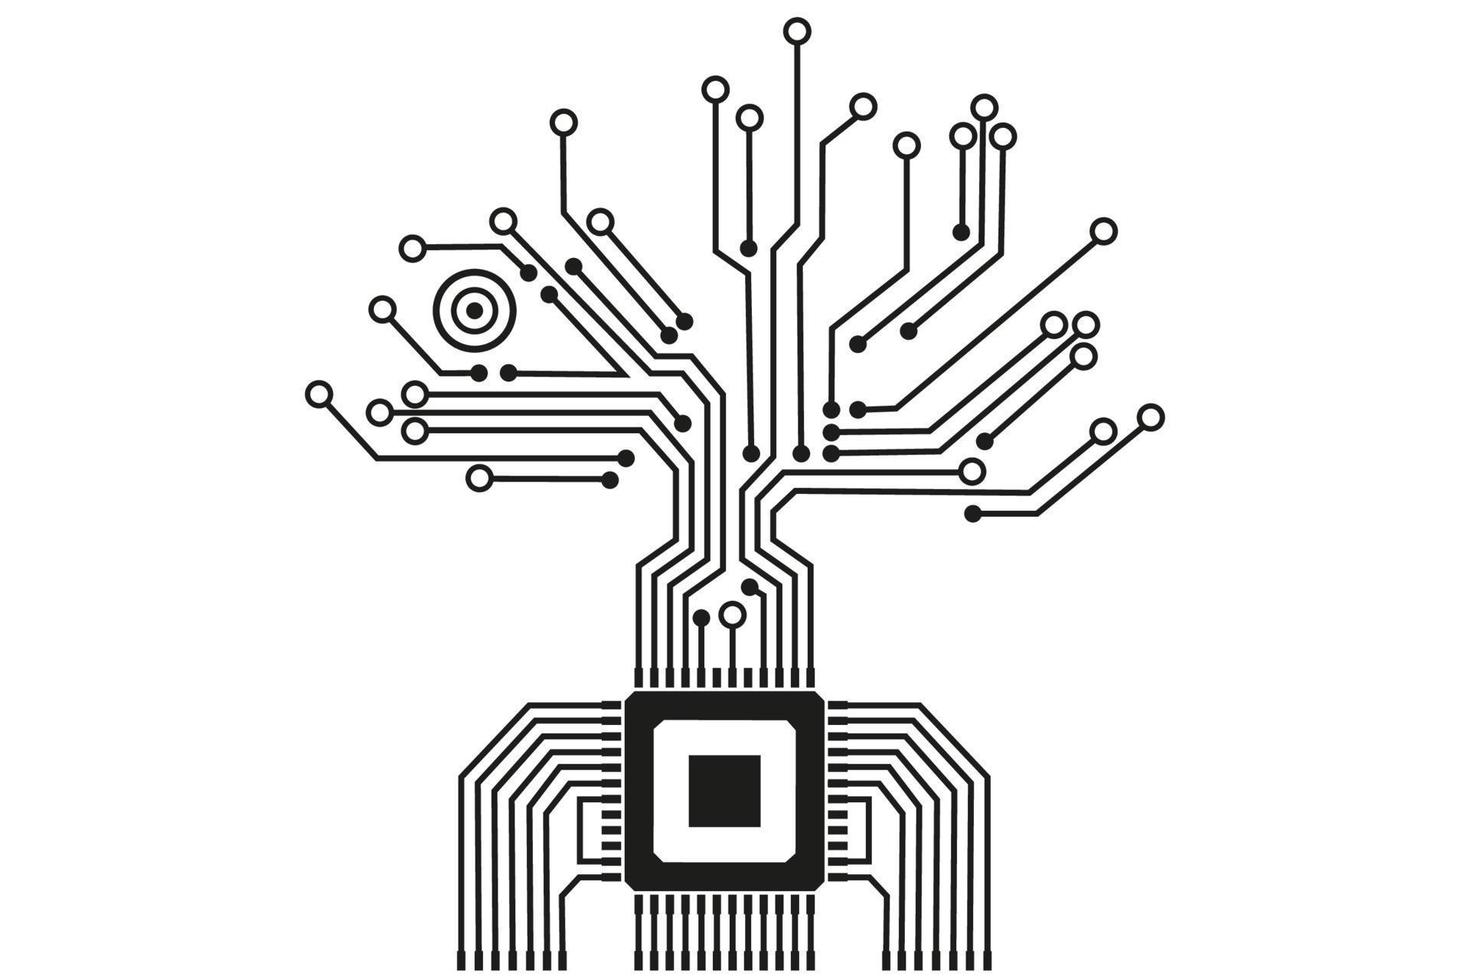 Circuit board electronic tree shape. Electronic vector elements for cyber design.